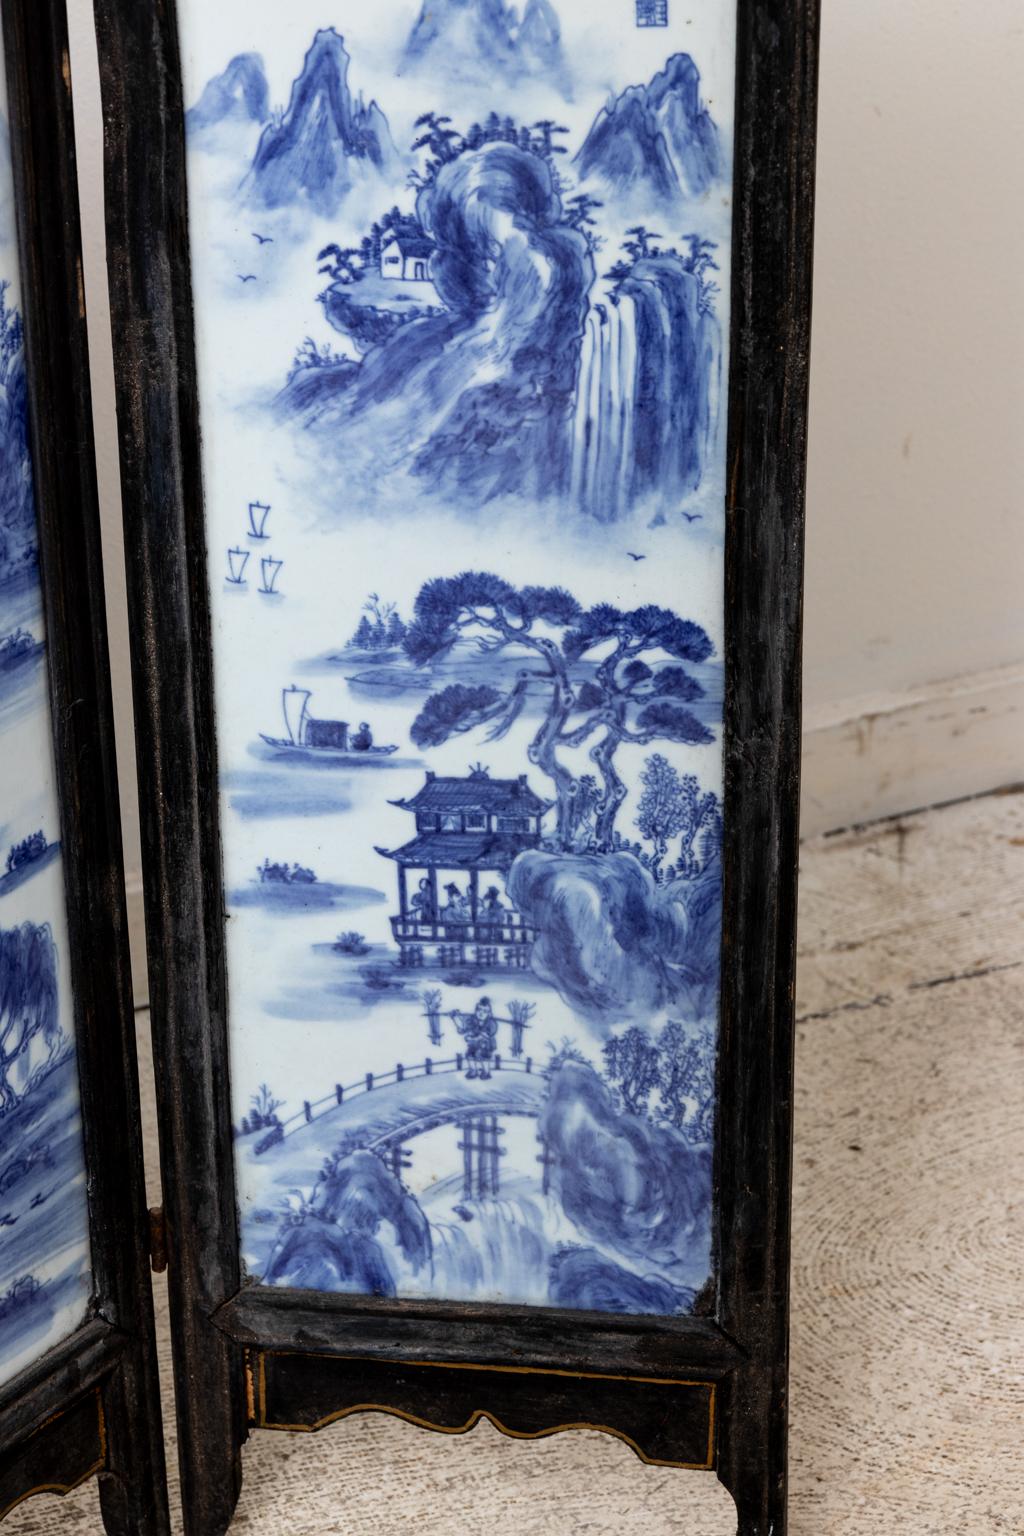 Circa 19th century unusual sized four panel Chinese wood screen inlayed with four blue and white painted porcelain panels of landscape scenes. Smaller floral motifs are also featured above the porcelain panels. Made in China. Please note of wear